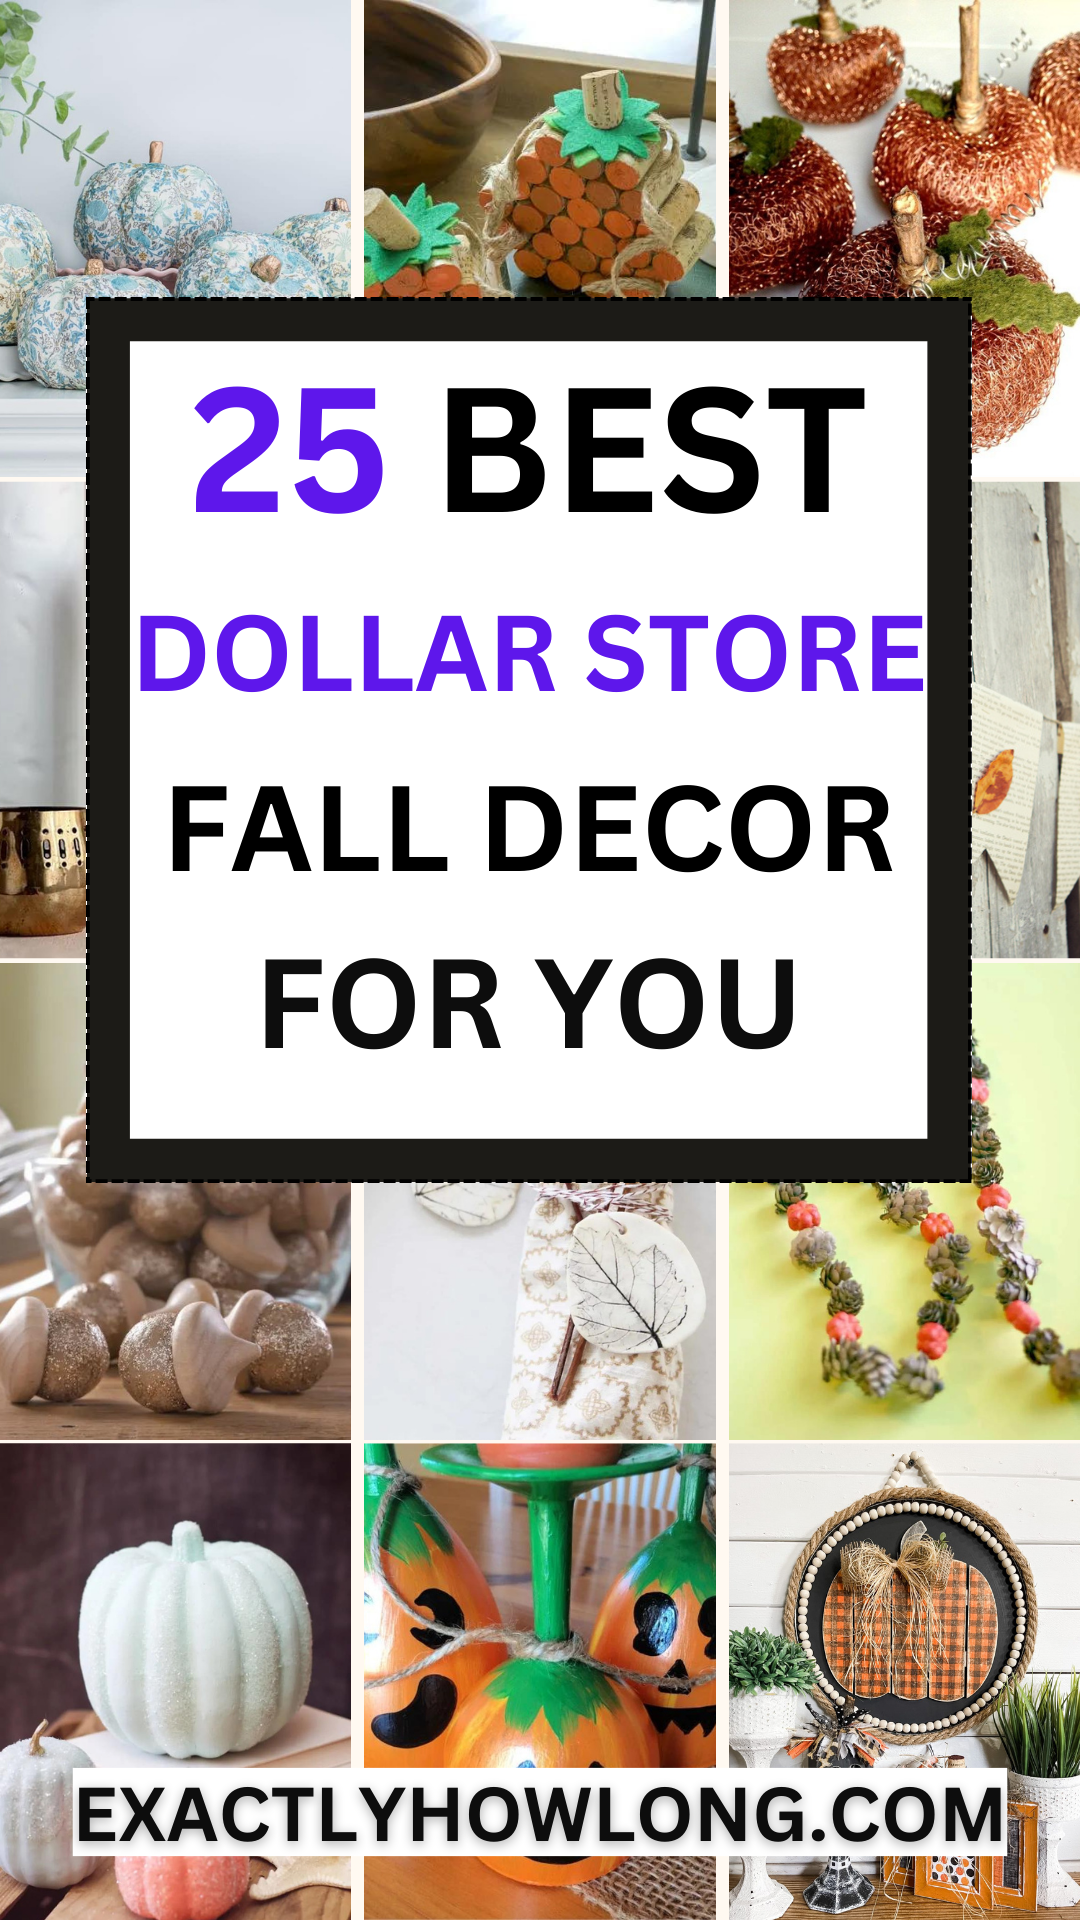 Inexpensive, simple DIY dollar store autumn decor ideas for home